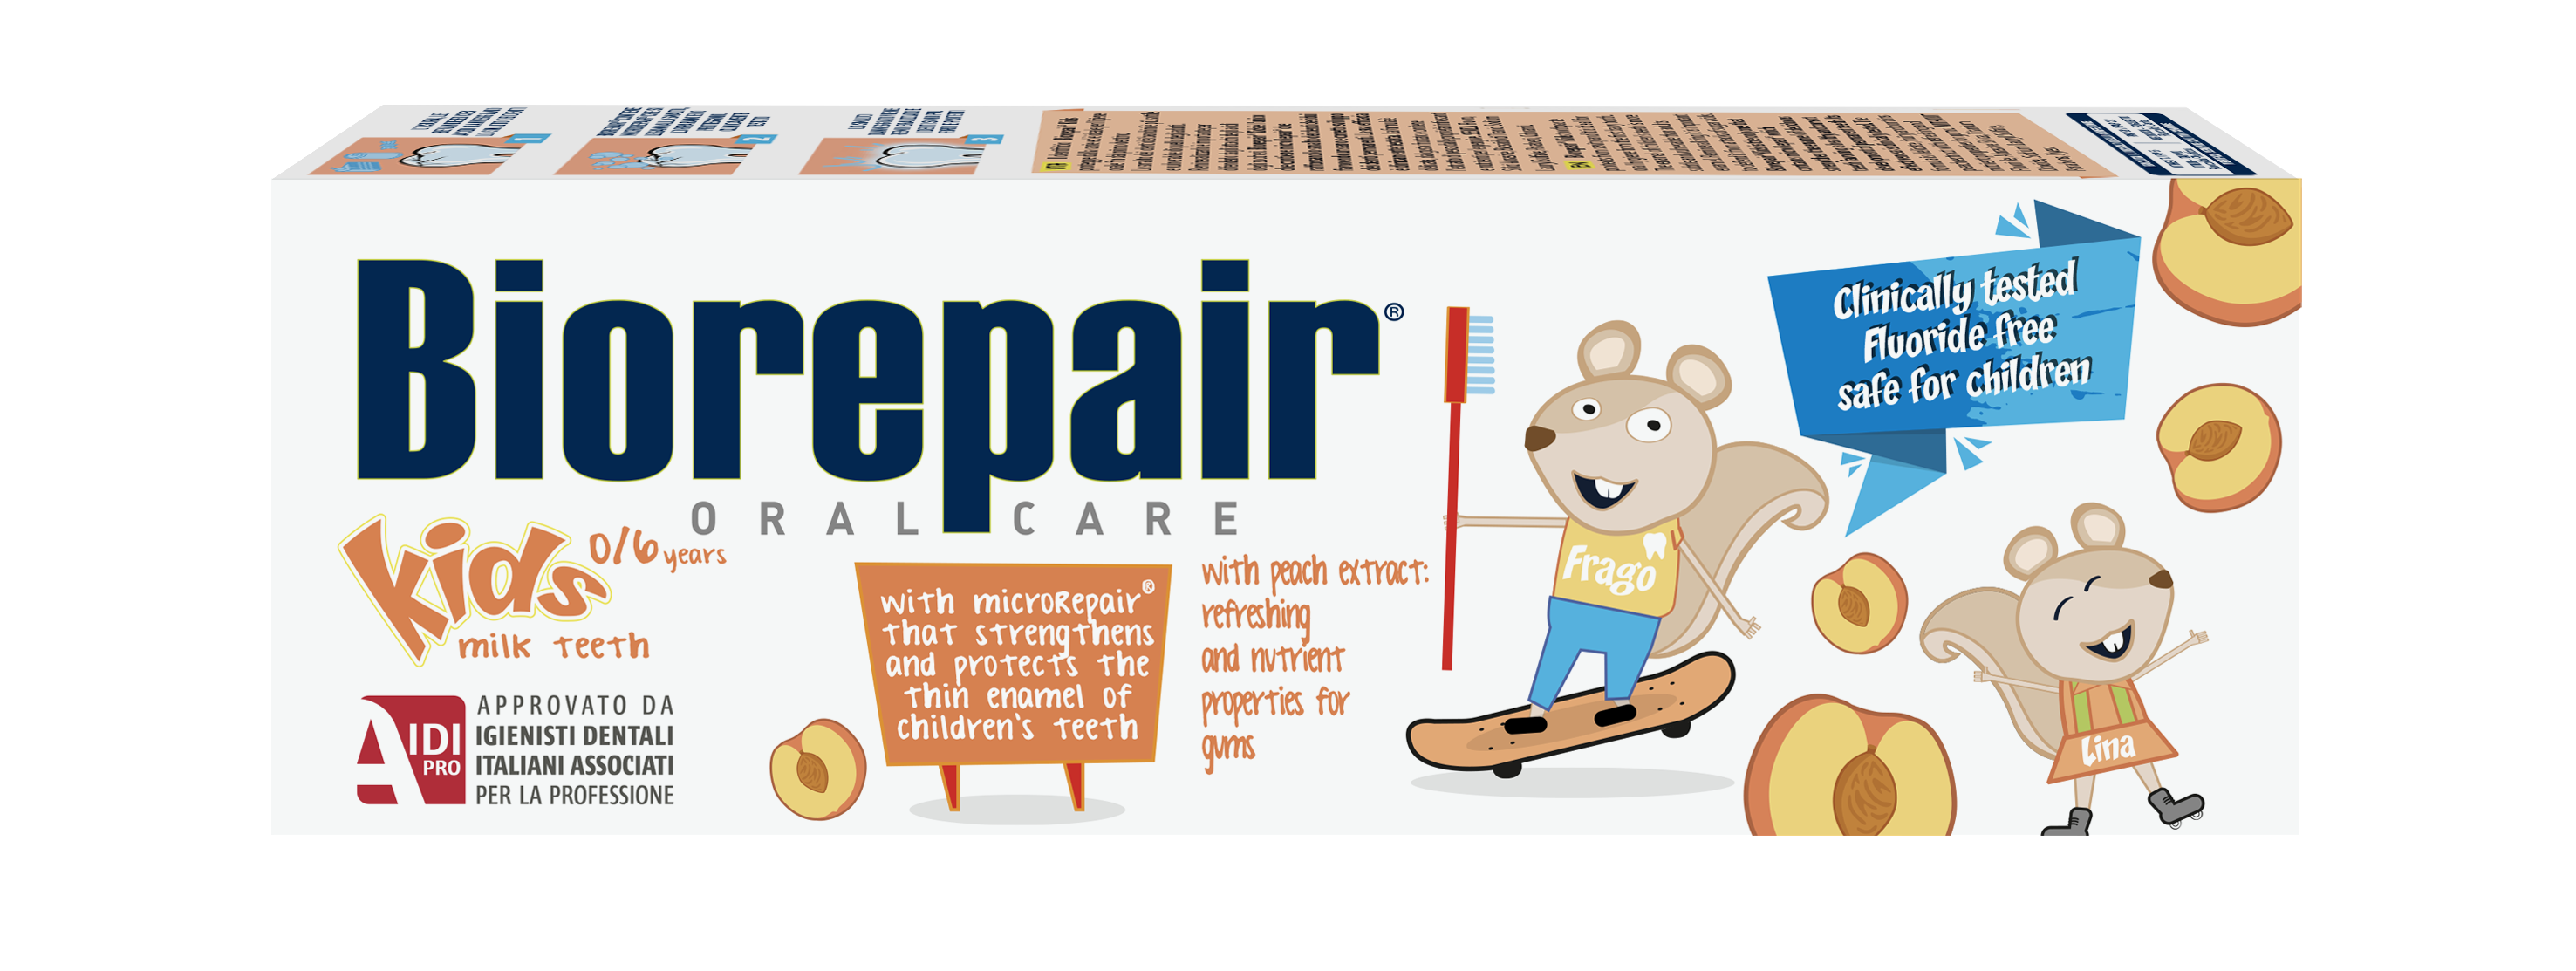 Biorepair® Toothpaste Kids 0/6 age with peach extract